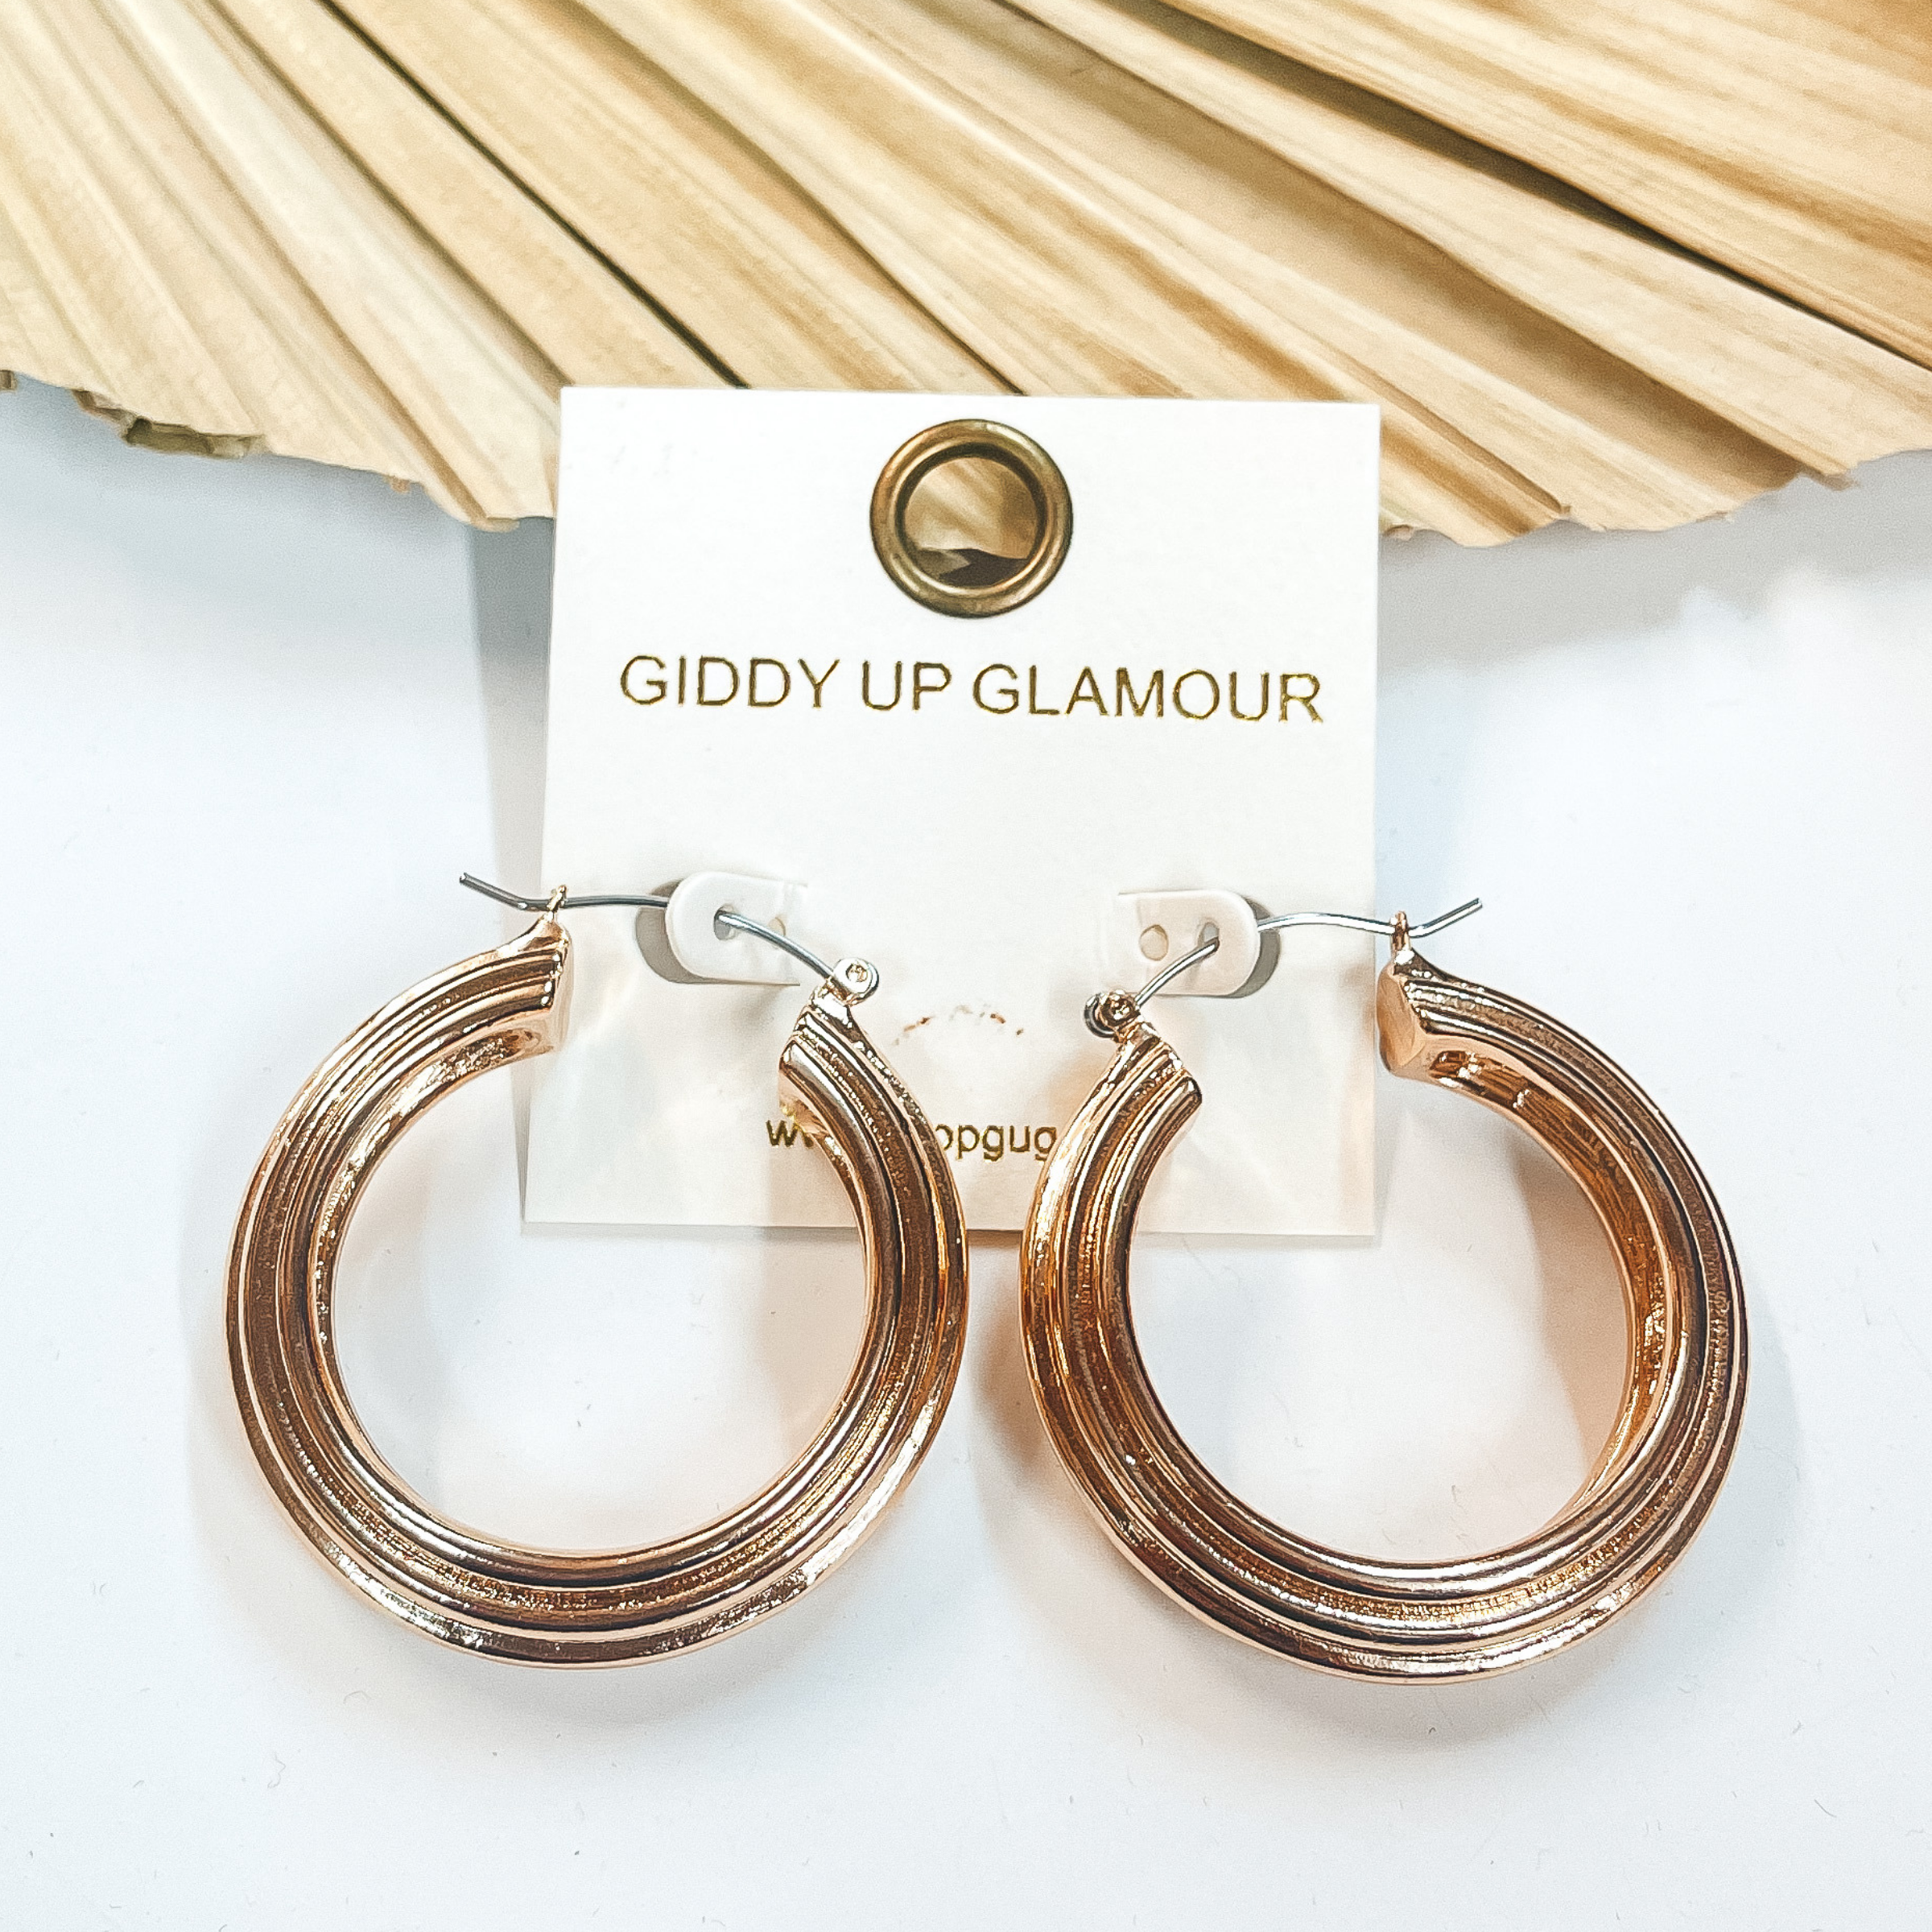 Thick gold hoop earrings with lined texture. Taken  on a white background and leaned up against a  dried up palm leaf.